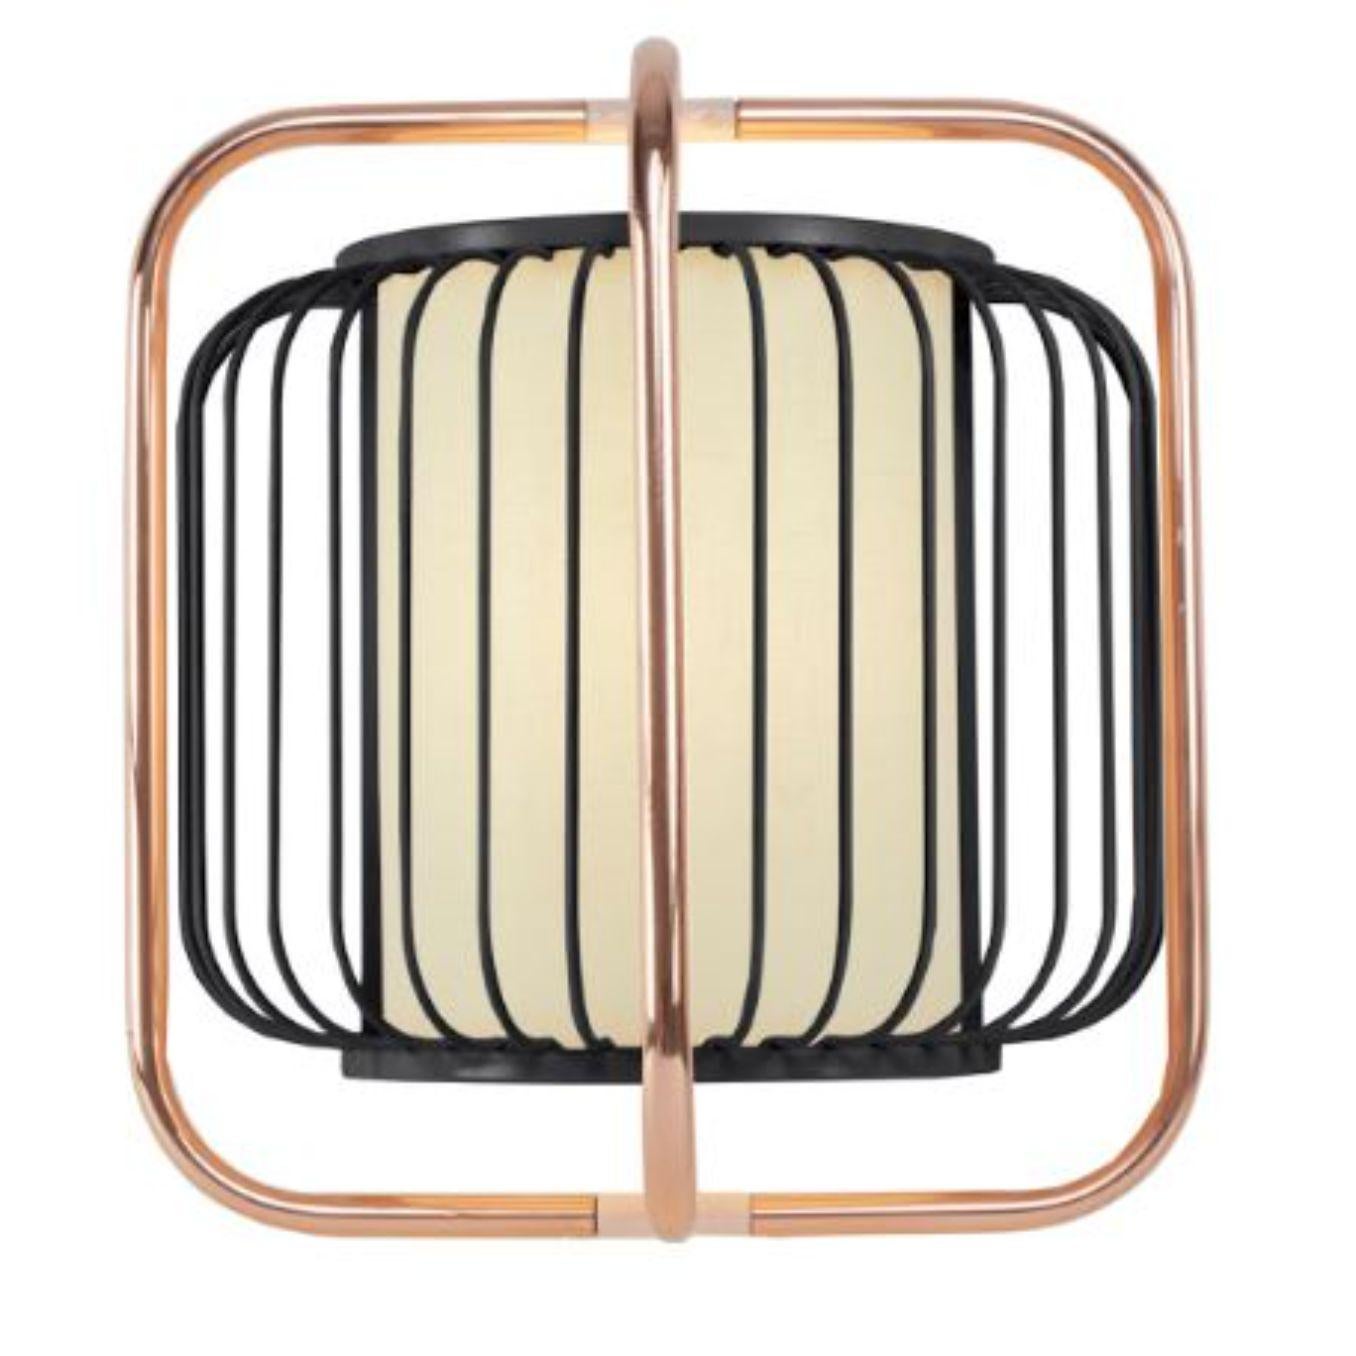 Copper and black Jules wall lamp by Dooq
Dimensions: W 40 x D 23 x H 40 cm
Materials: lacquered metal, polished or brushed metal, copper. 
Abat-jour: cotton
Also available in different colors and materials.

Information:
230V/50Hz
E14/1x15W